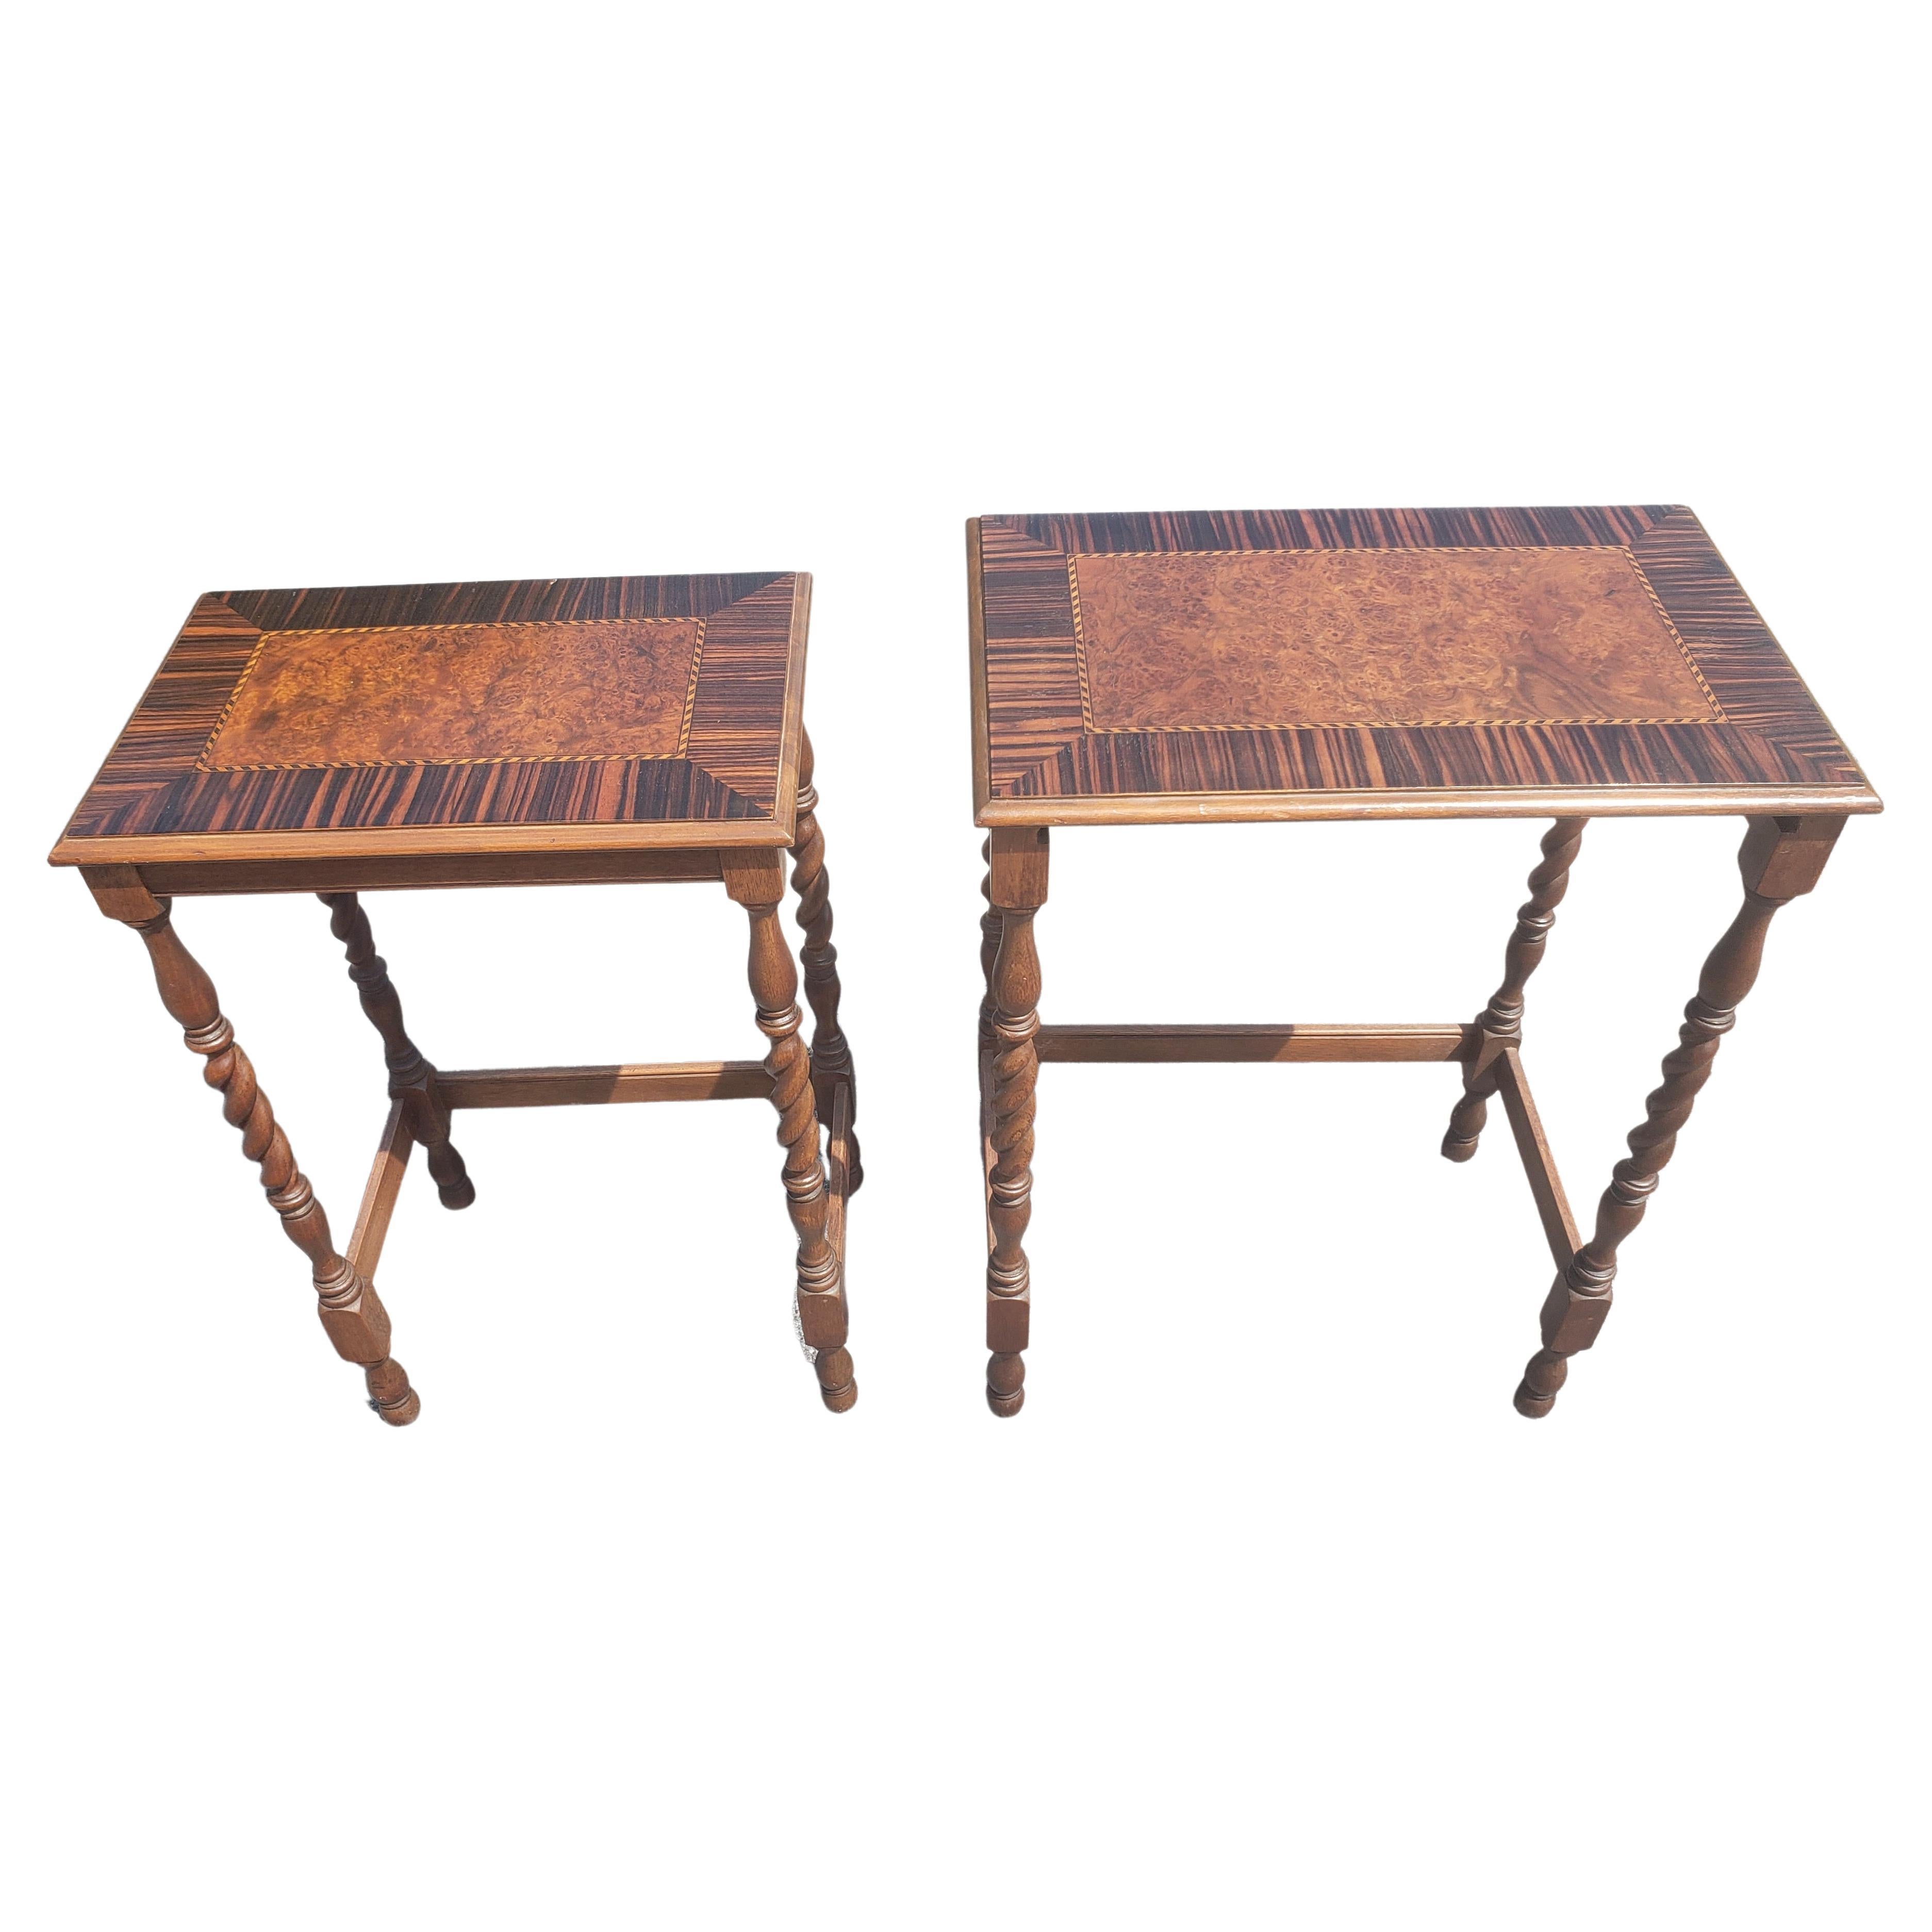 Vintage Mahogany Barley Twist Banded Walnut Satinwood Burl Nesting Tables In Good Condition For Sale In Germantown, MD